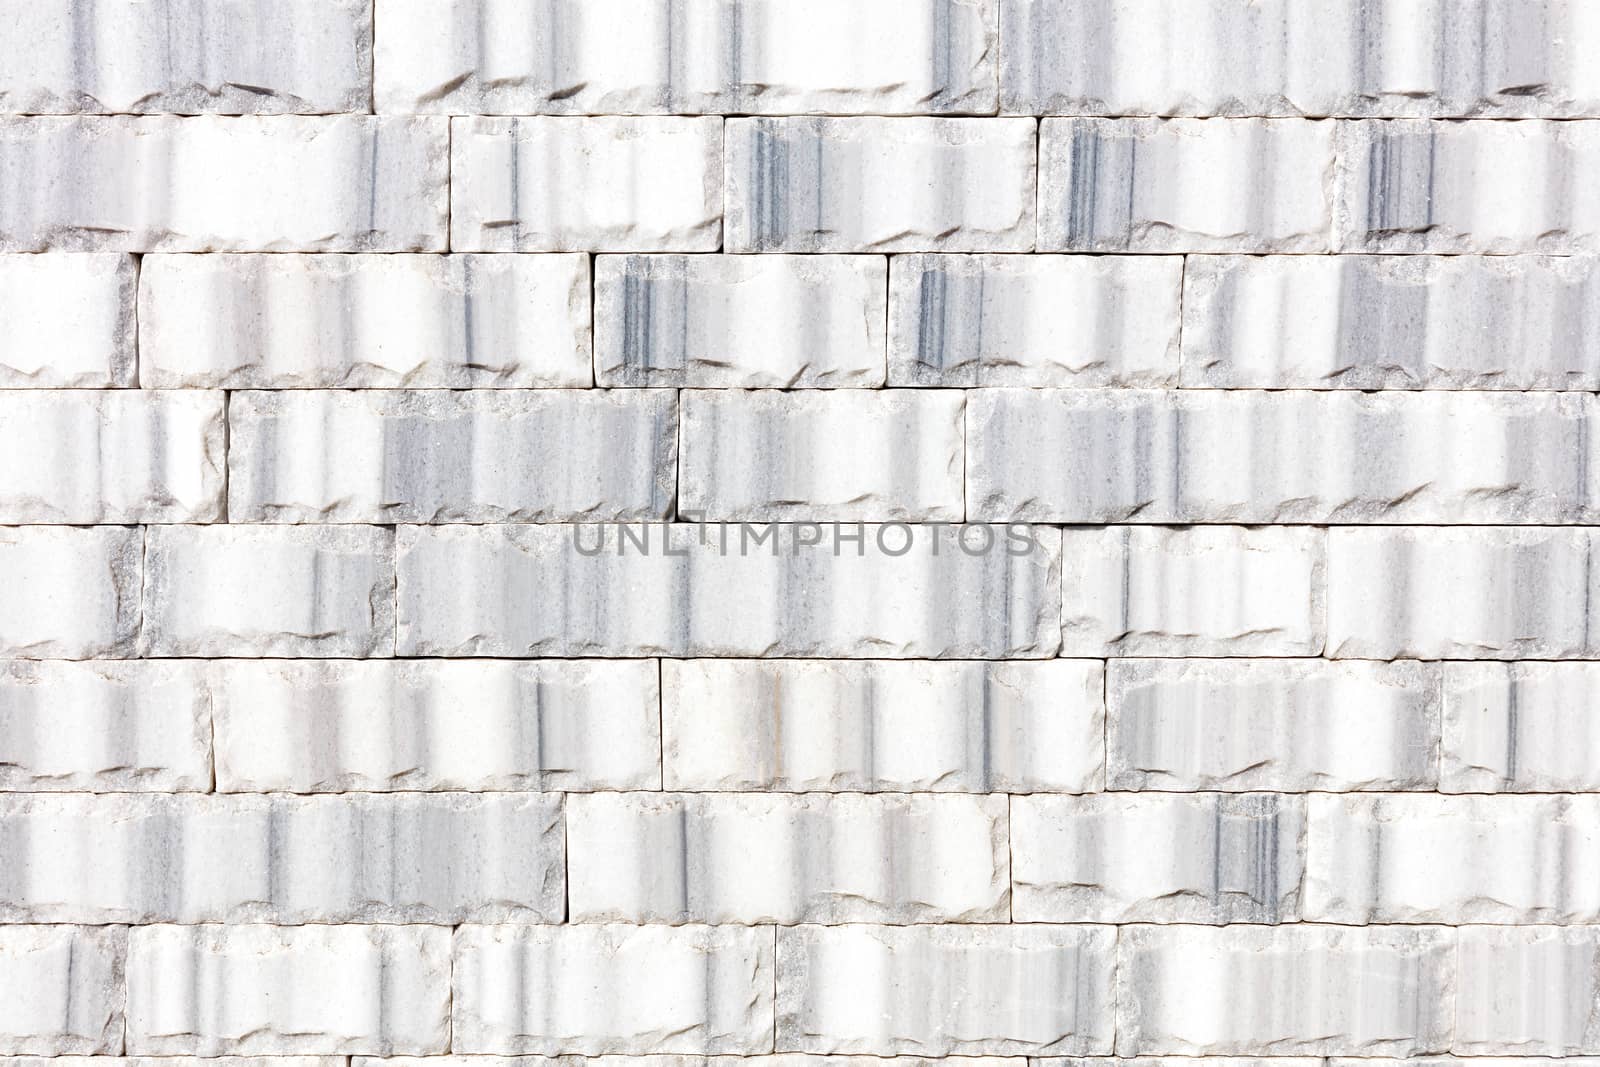 Wall background and texture of gray marble tiles chipped around the perimeter, close-up.